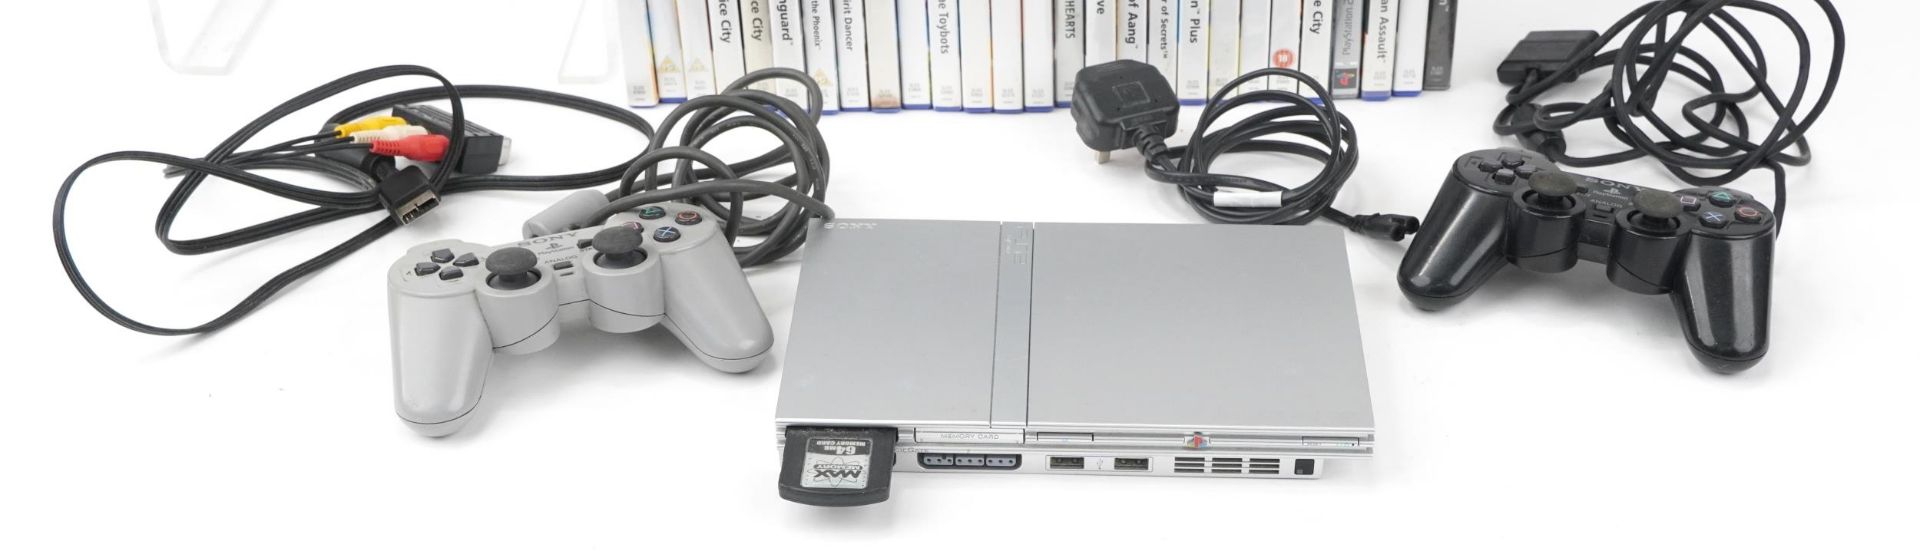 Sony PlayStation 2 games console with controllers and a collection of games - Image 3 of 3